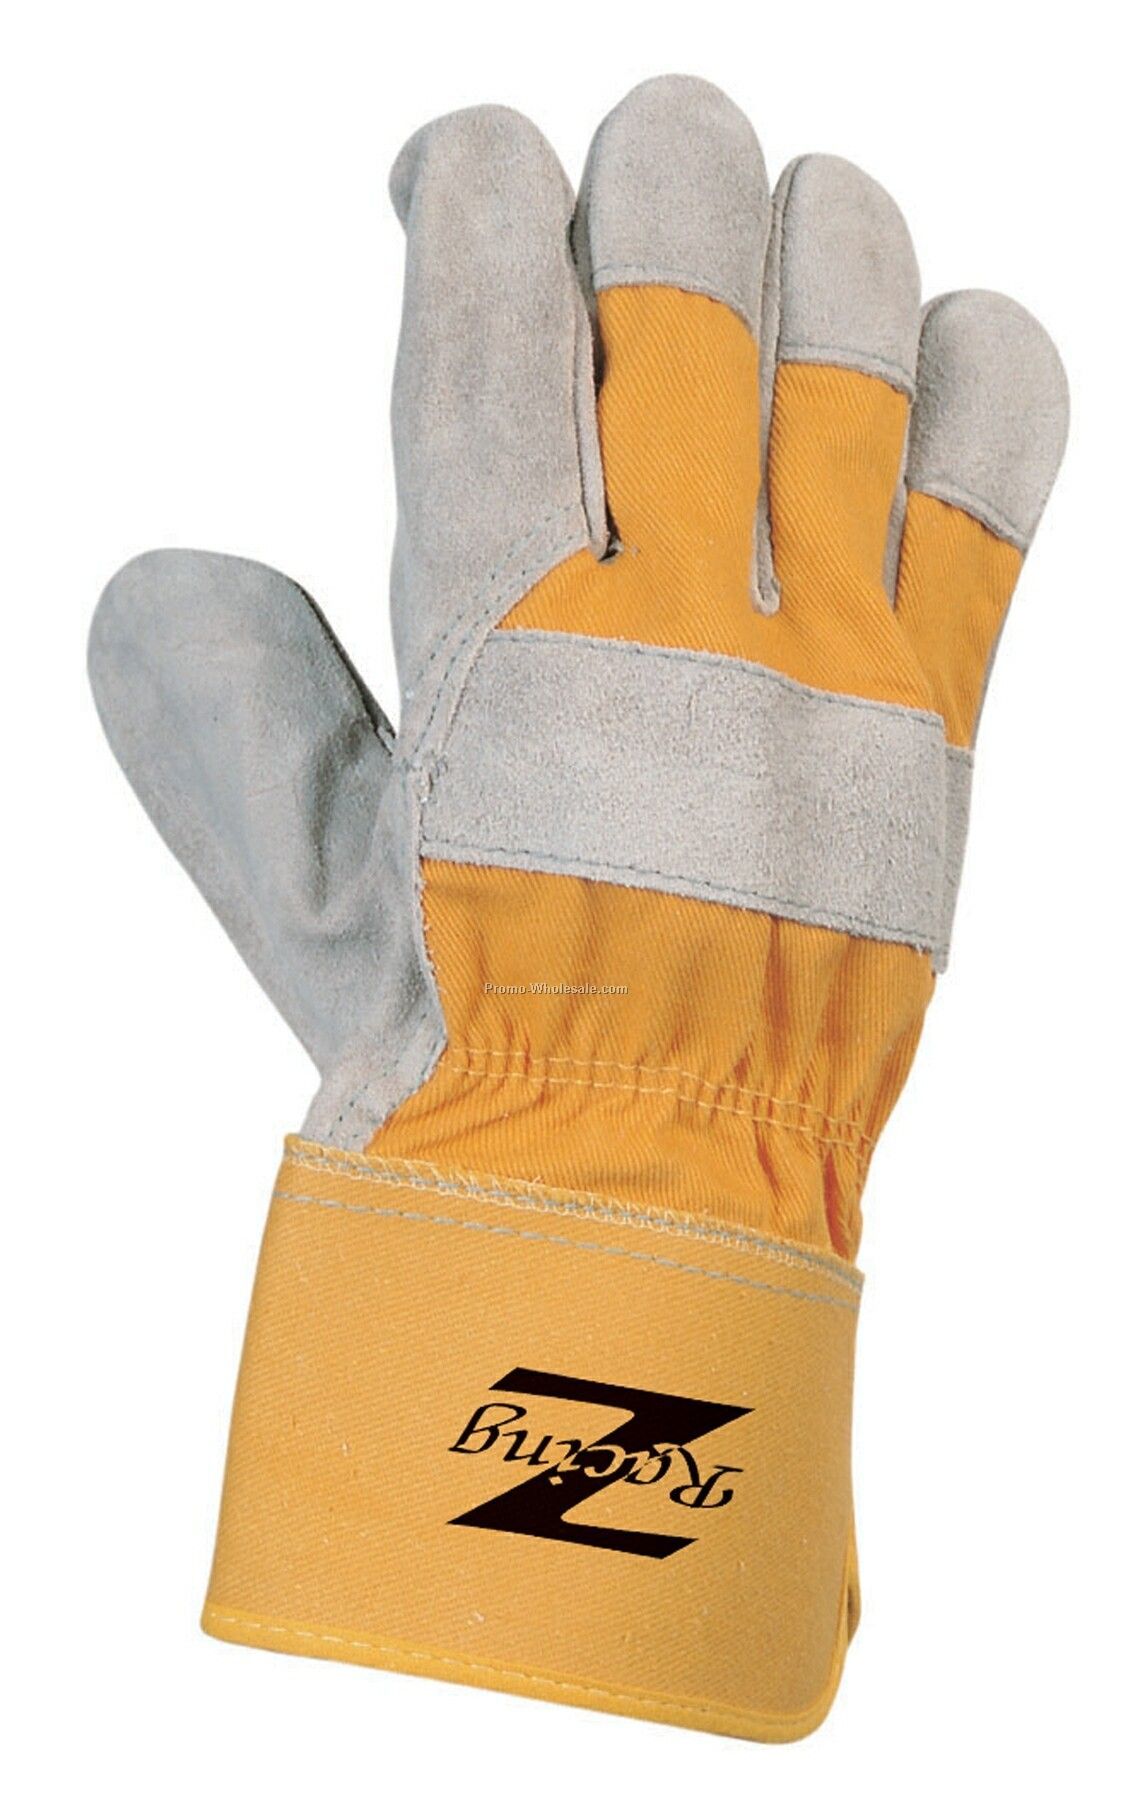 Premium Leather Palm Split Cowhide Glove With Gauntlet Cuff (One Size)